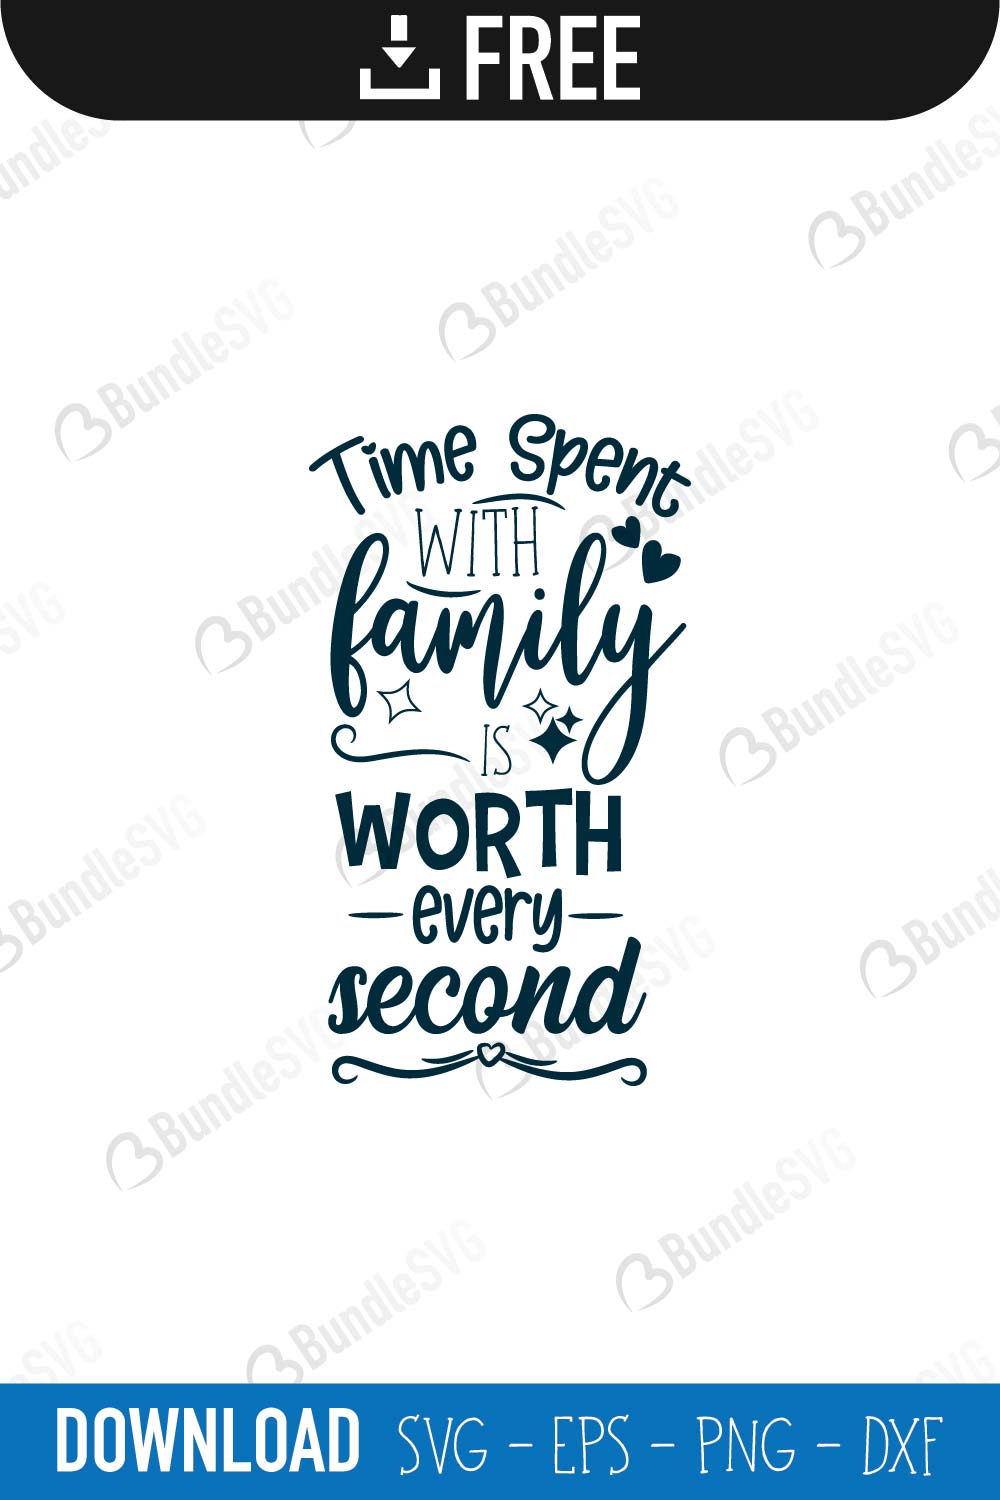 Download Clip Art Family Sayings Svg Laser Cut Family Quotes Svg Cricut Cut Files Silhouette Time Spent With Family Is Worth Every Second Svg Art Collectibles